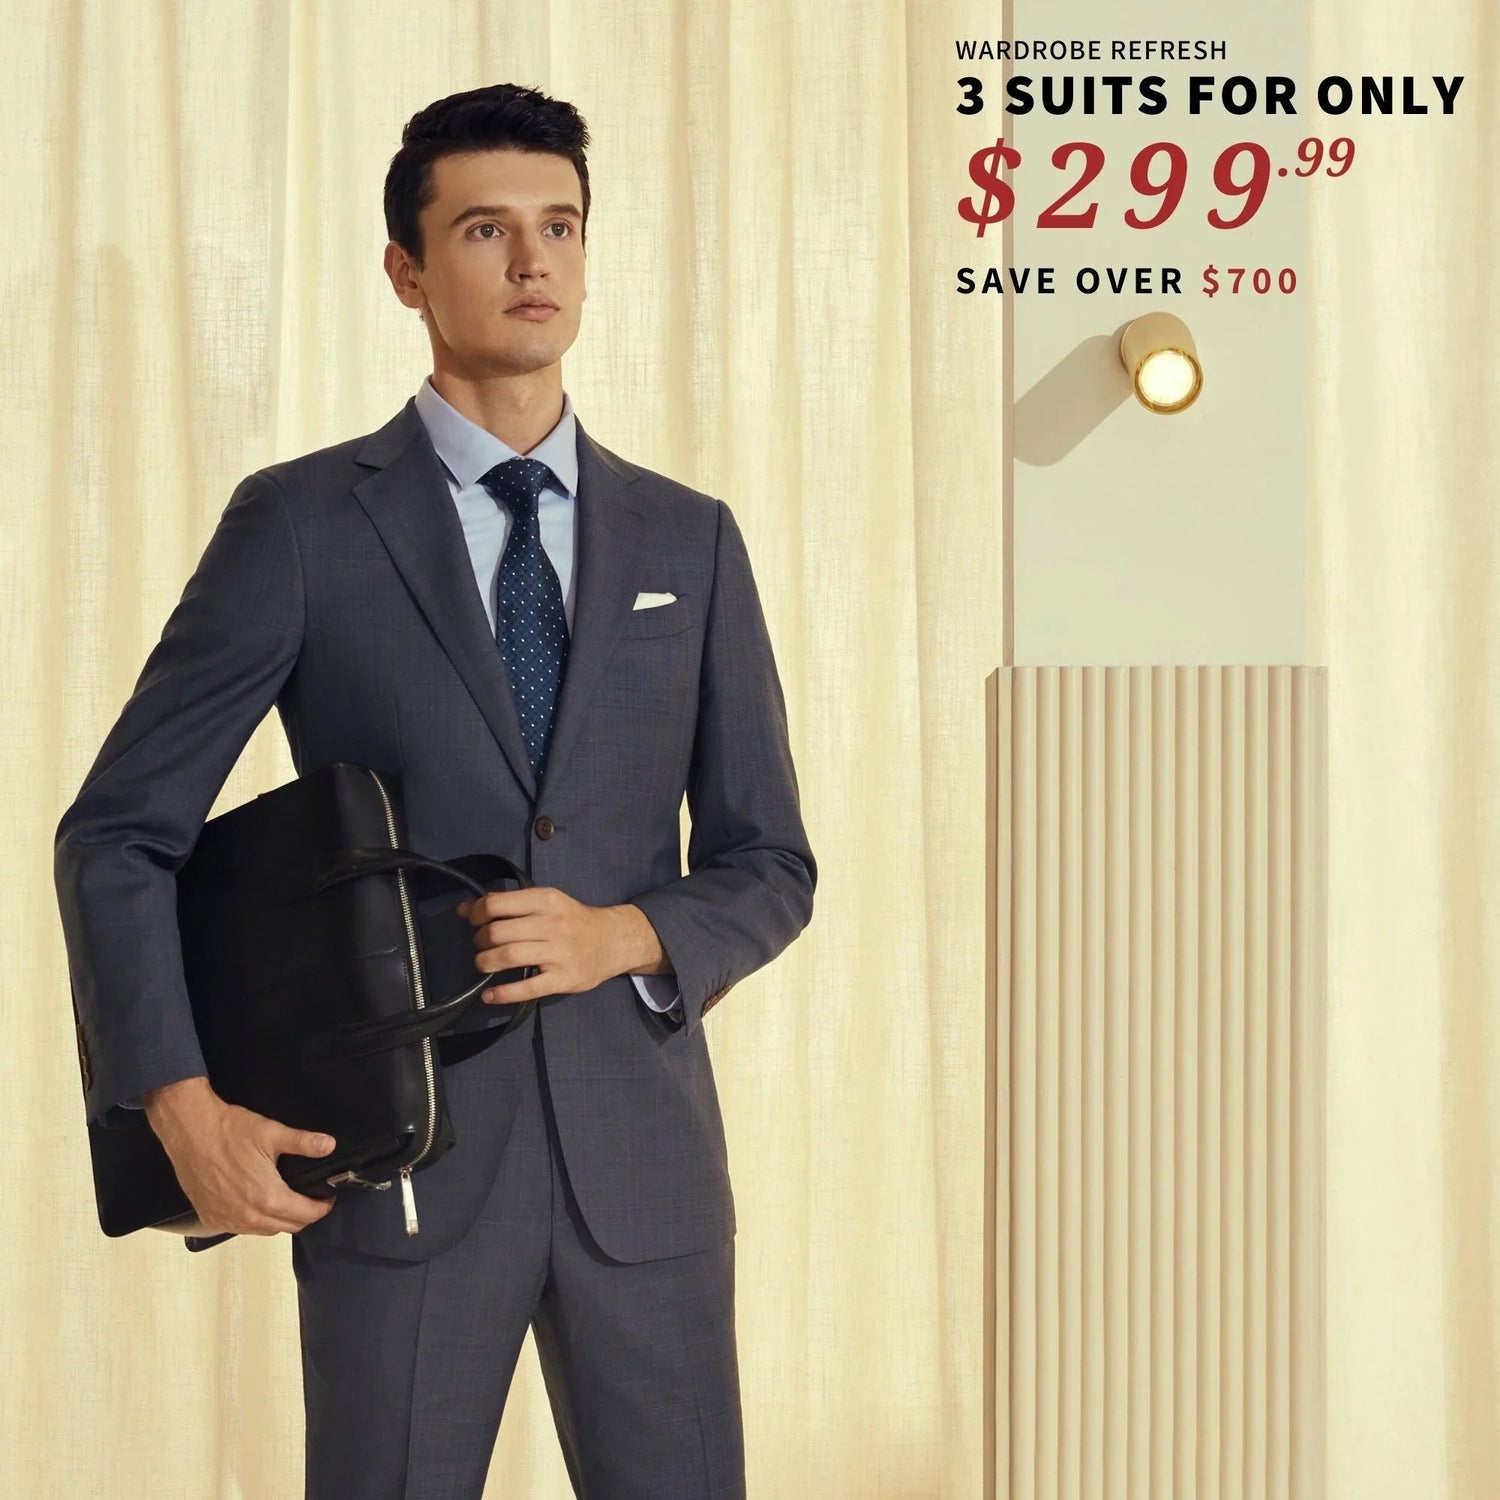 Man in a tailored suit holding a helmet, advertising BYOB's online-only 3 Suits for $299 sale.